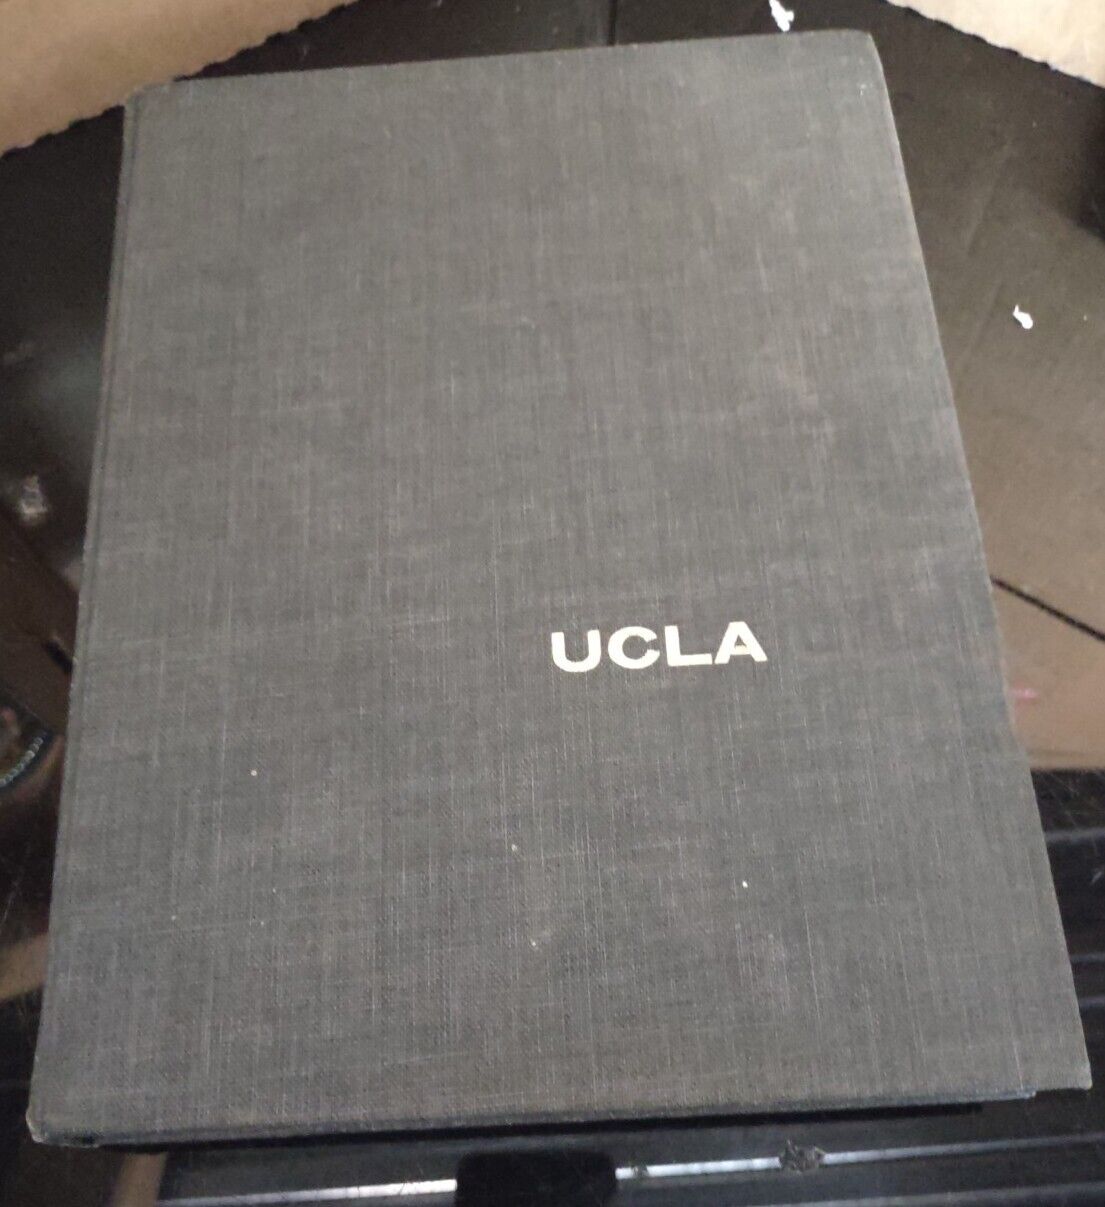 UCLA Yearbook 1961- UCLA Southern Campus Vol 42- Hardcover EUC